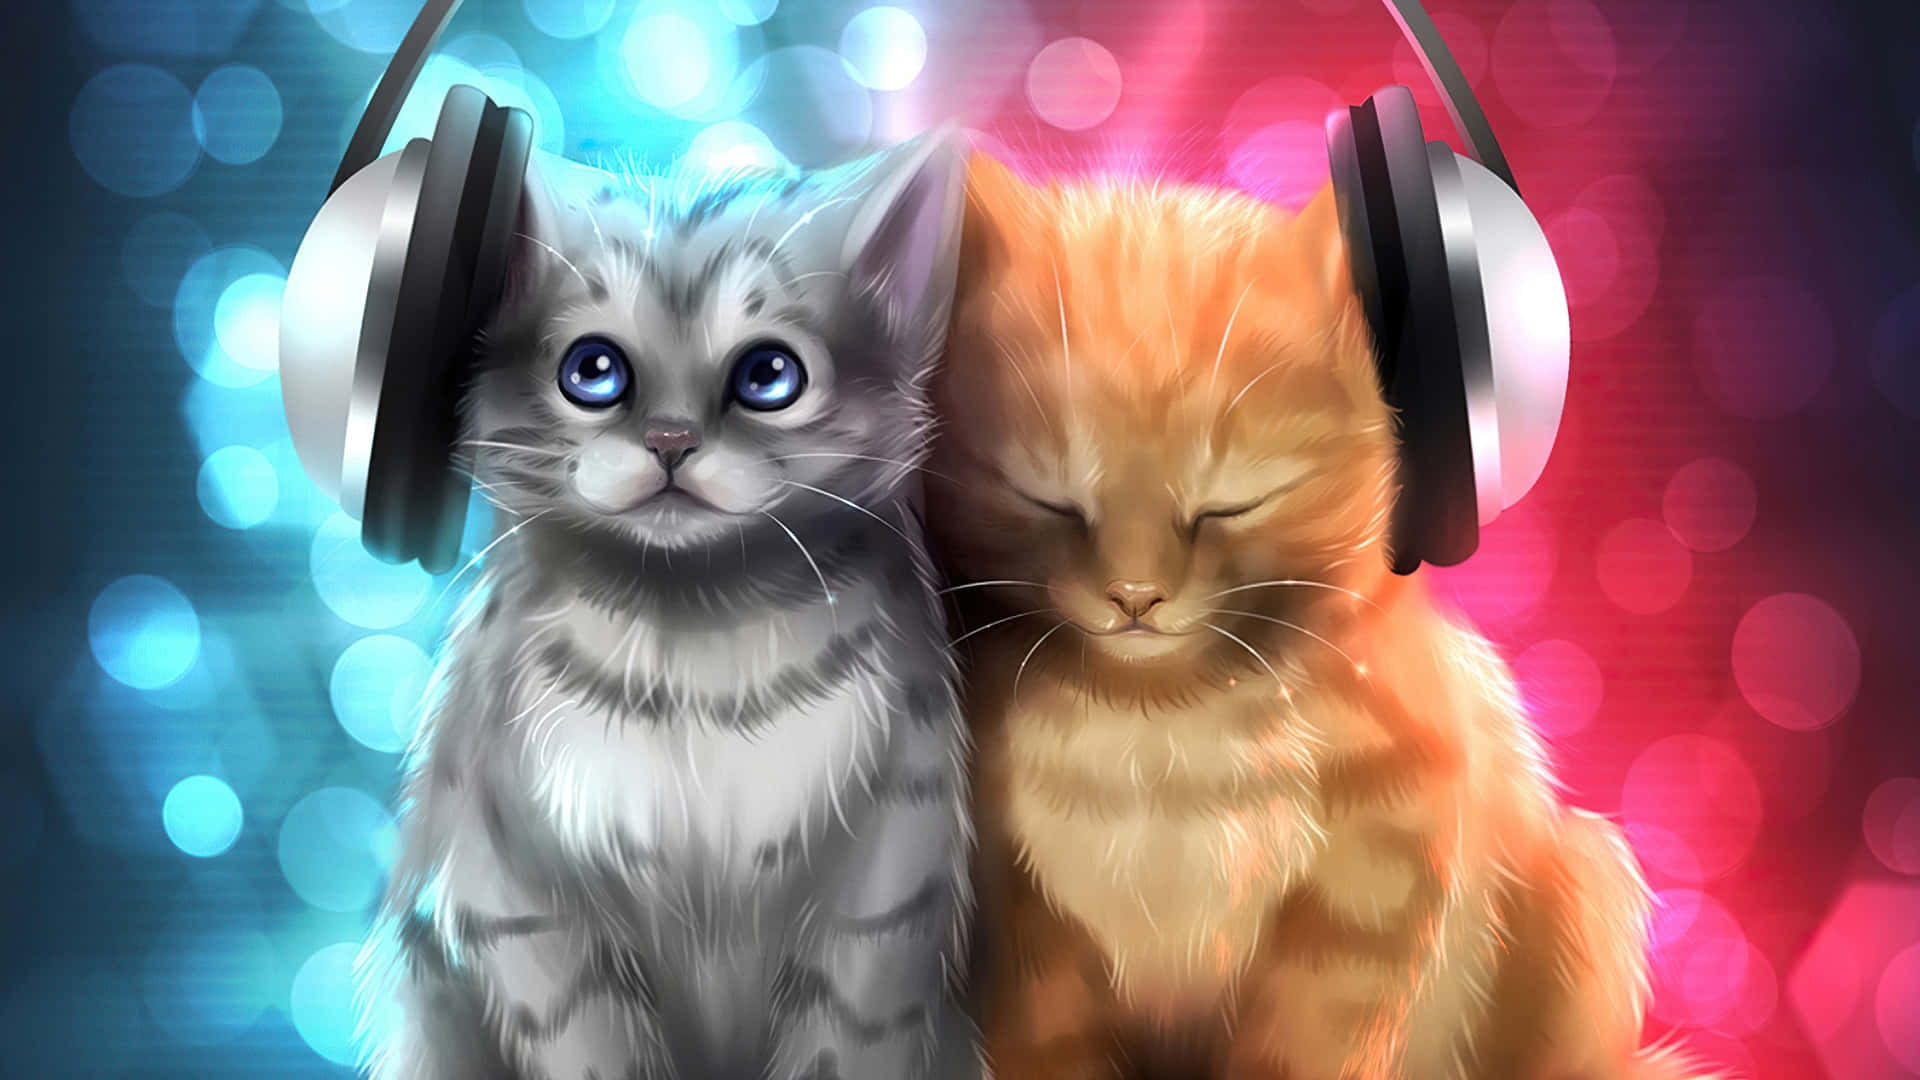 Two Cats With Headphones On Their Heads Background